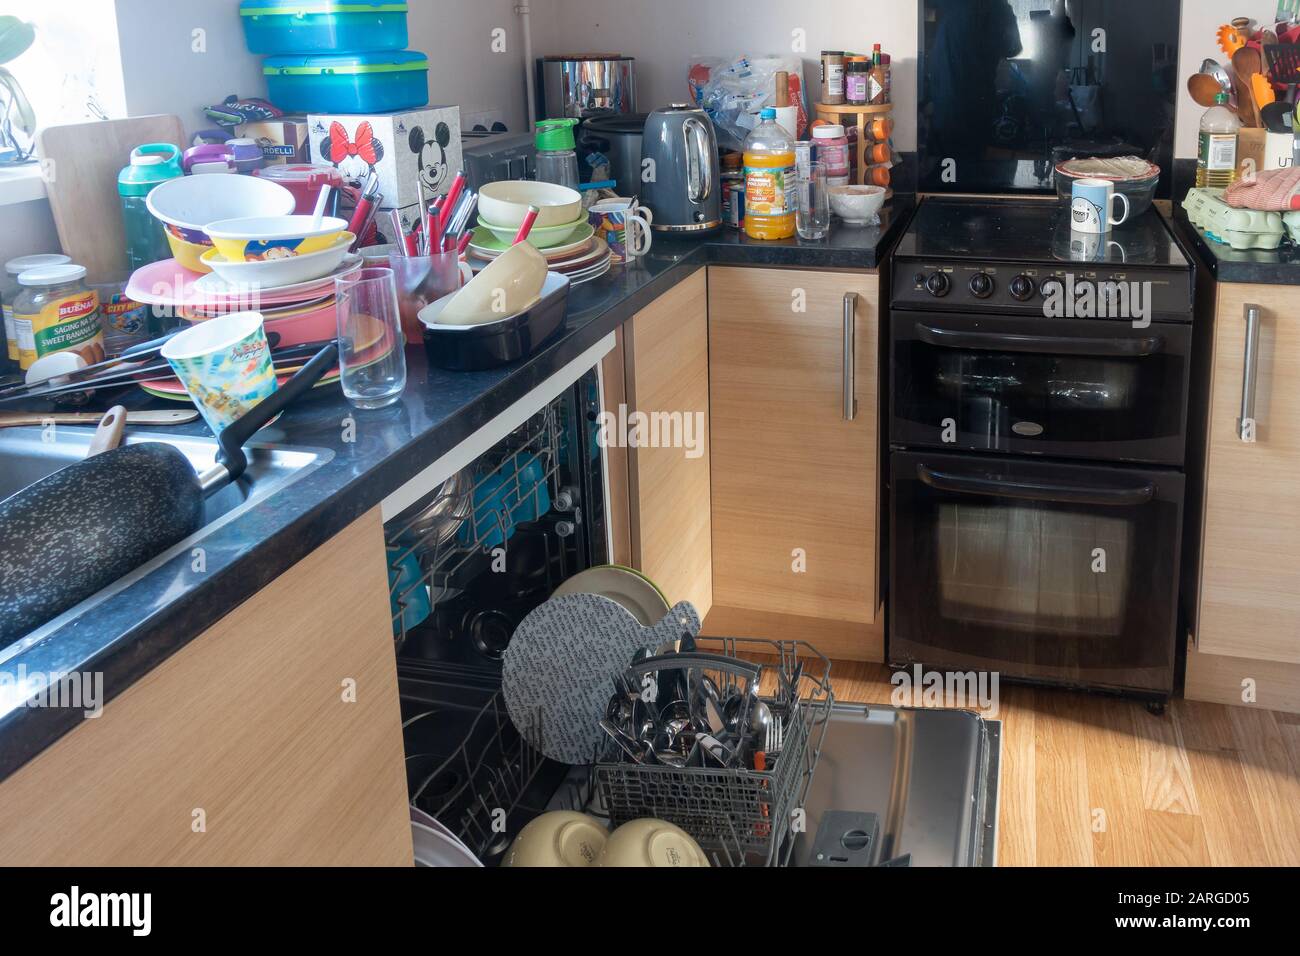 A dishwasher containing clean dishes with dirt dishes piled up by the side of the kitchen sink. Stock Photo